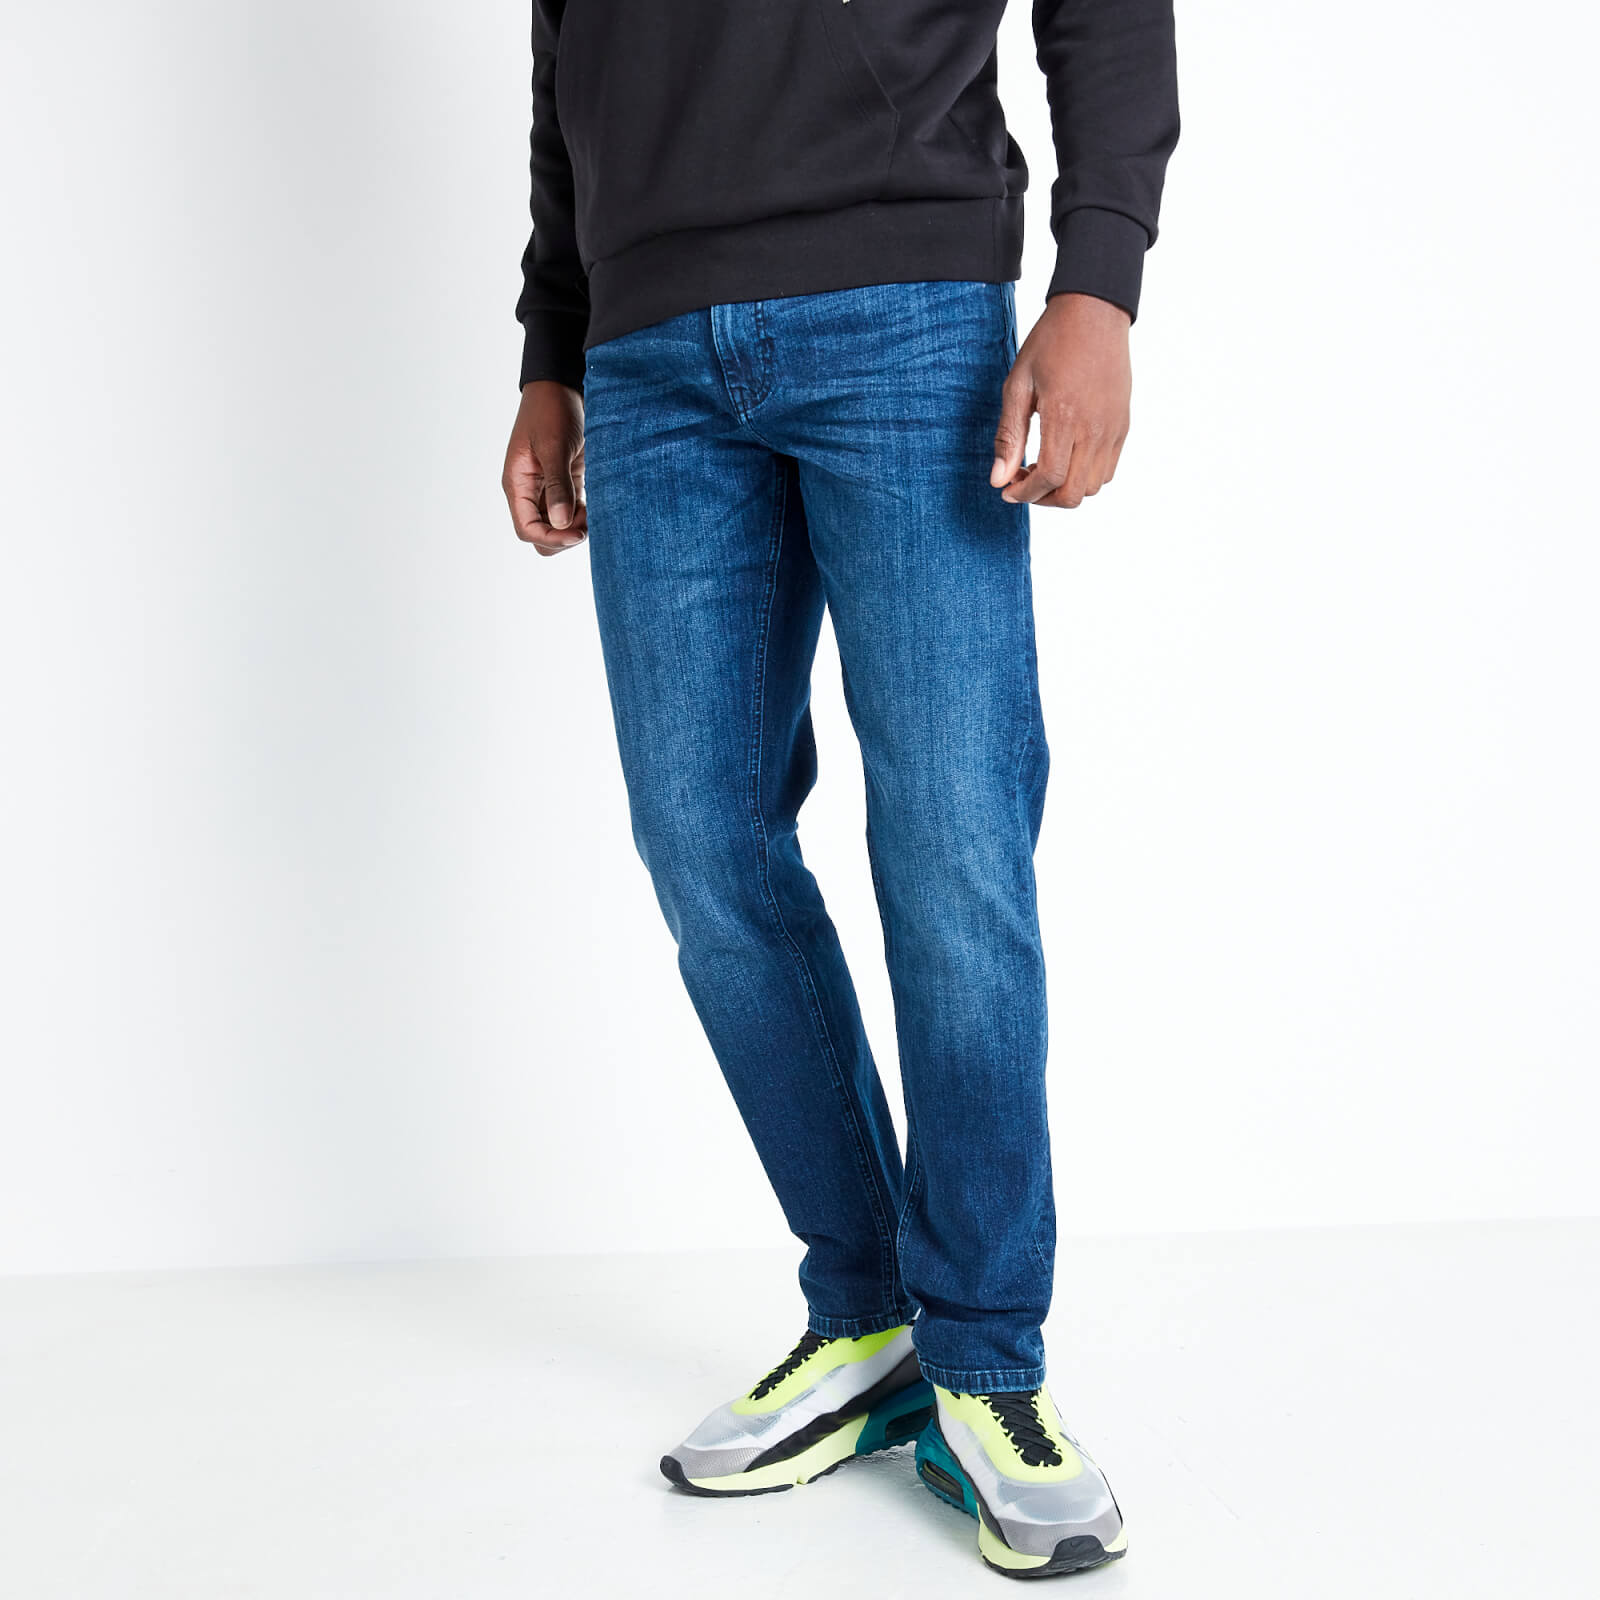 Sustainable Slim Tapered Jeans - W36 L30 from 11 Degrees